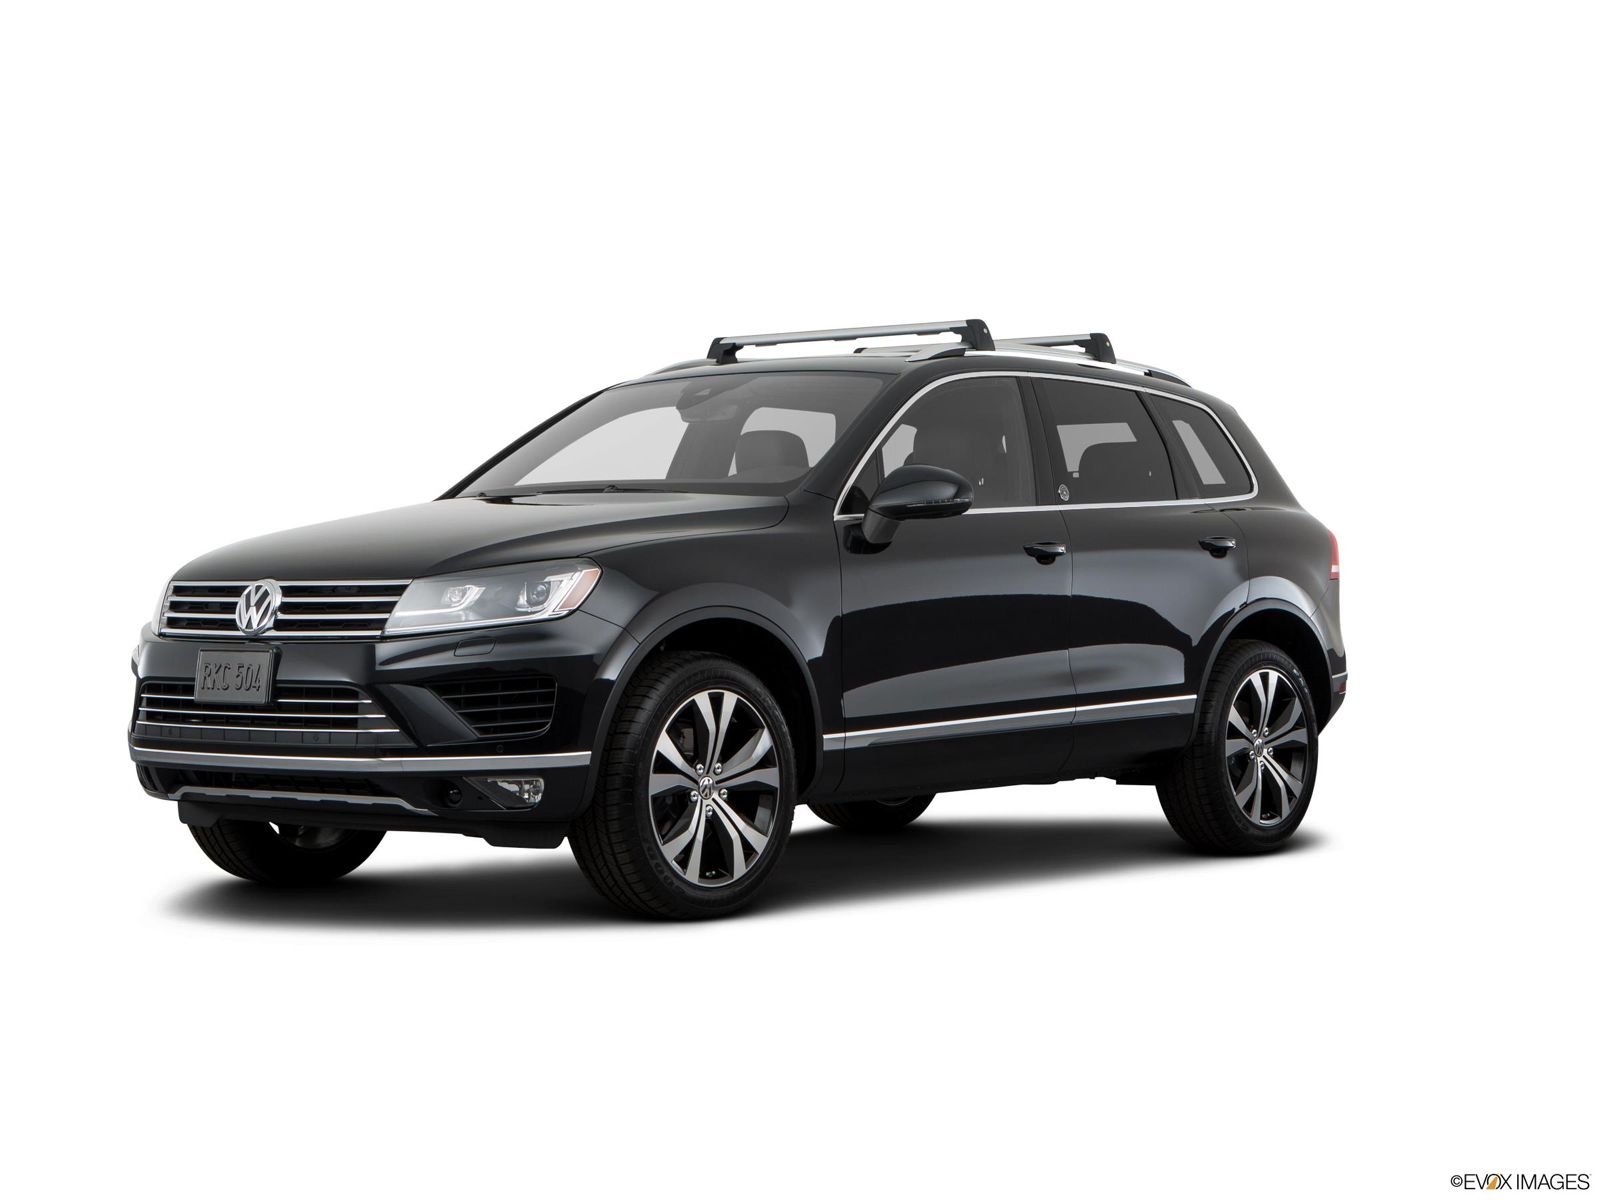 2017 Volkswagen Touareg Research, Photos, Specs and Expertise | CarMax